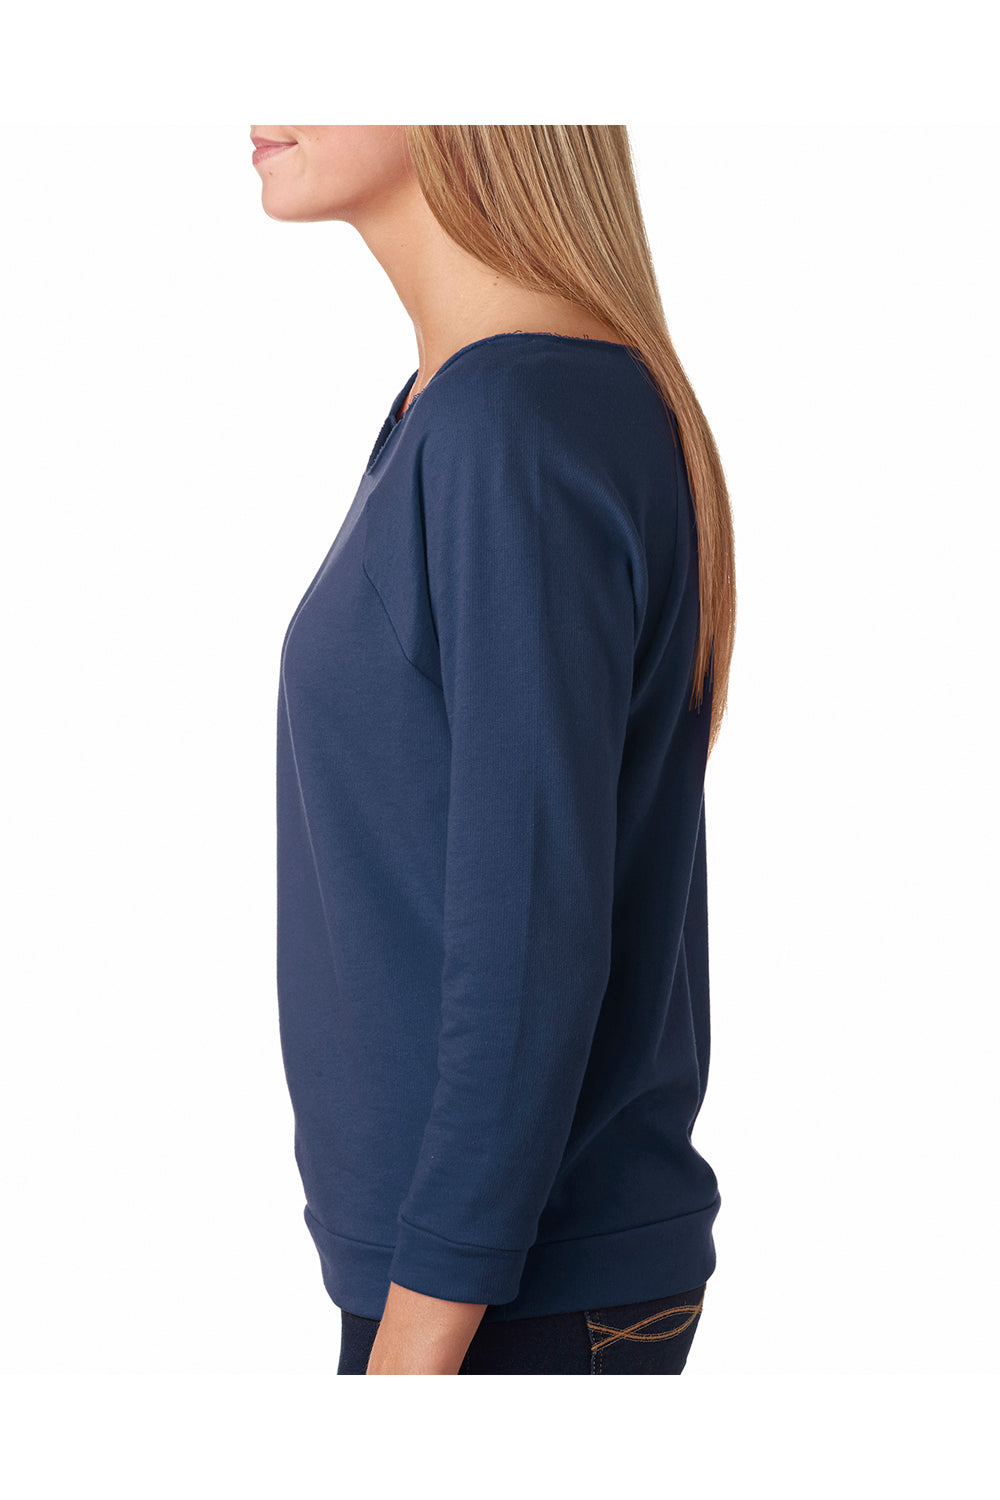 Next Level 6951 Womens French Terry 3/4 Sleeve Wide Neck T-Shirt Indigo Blue Side